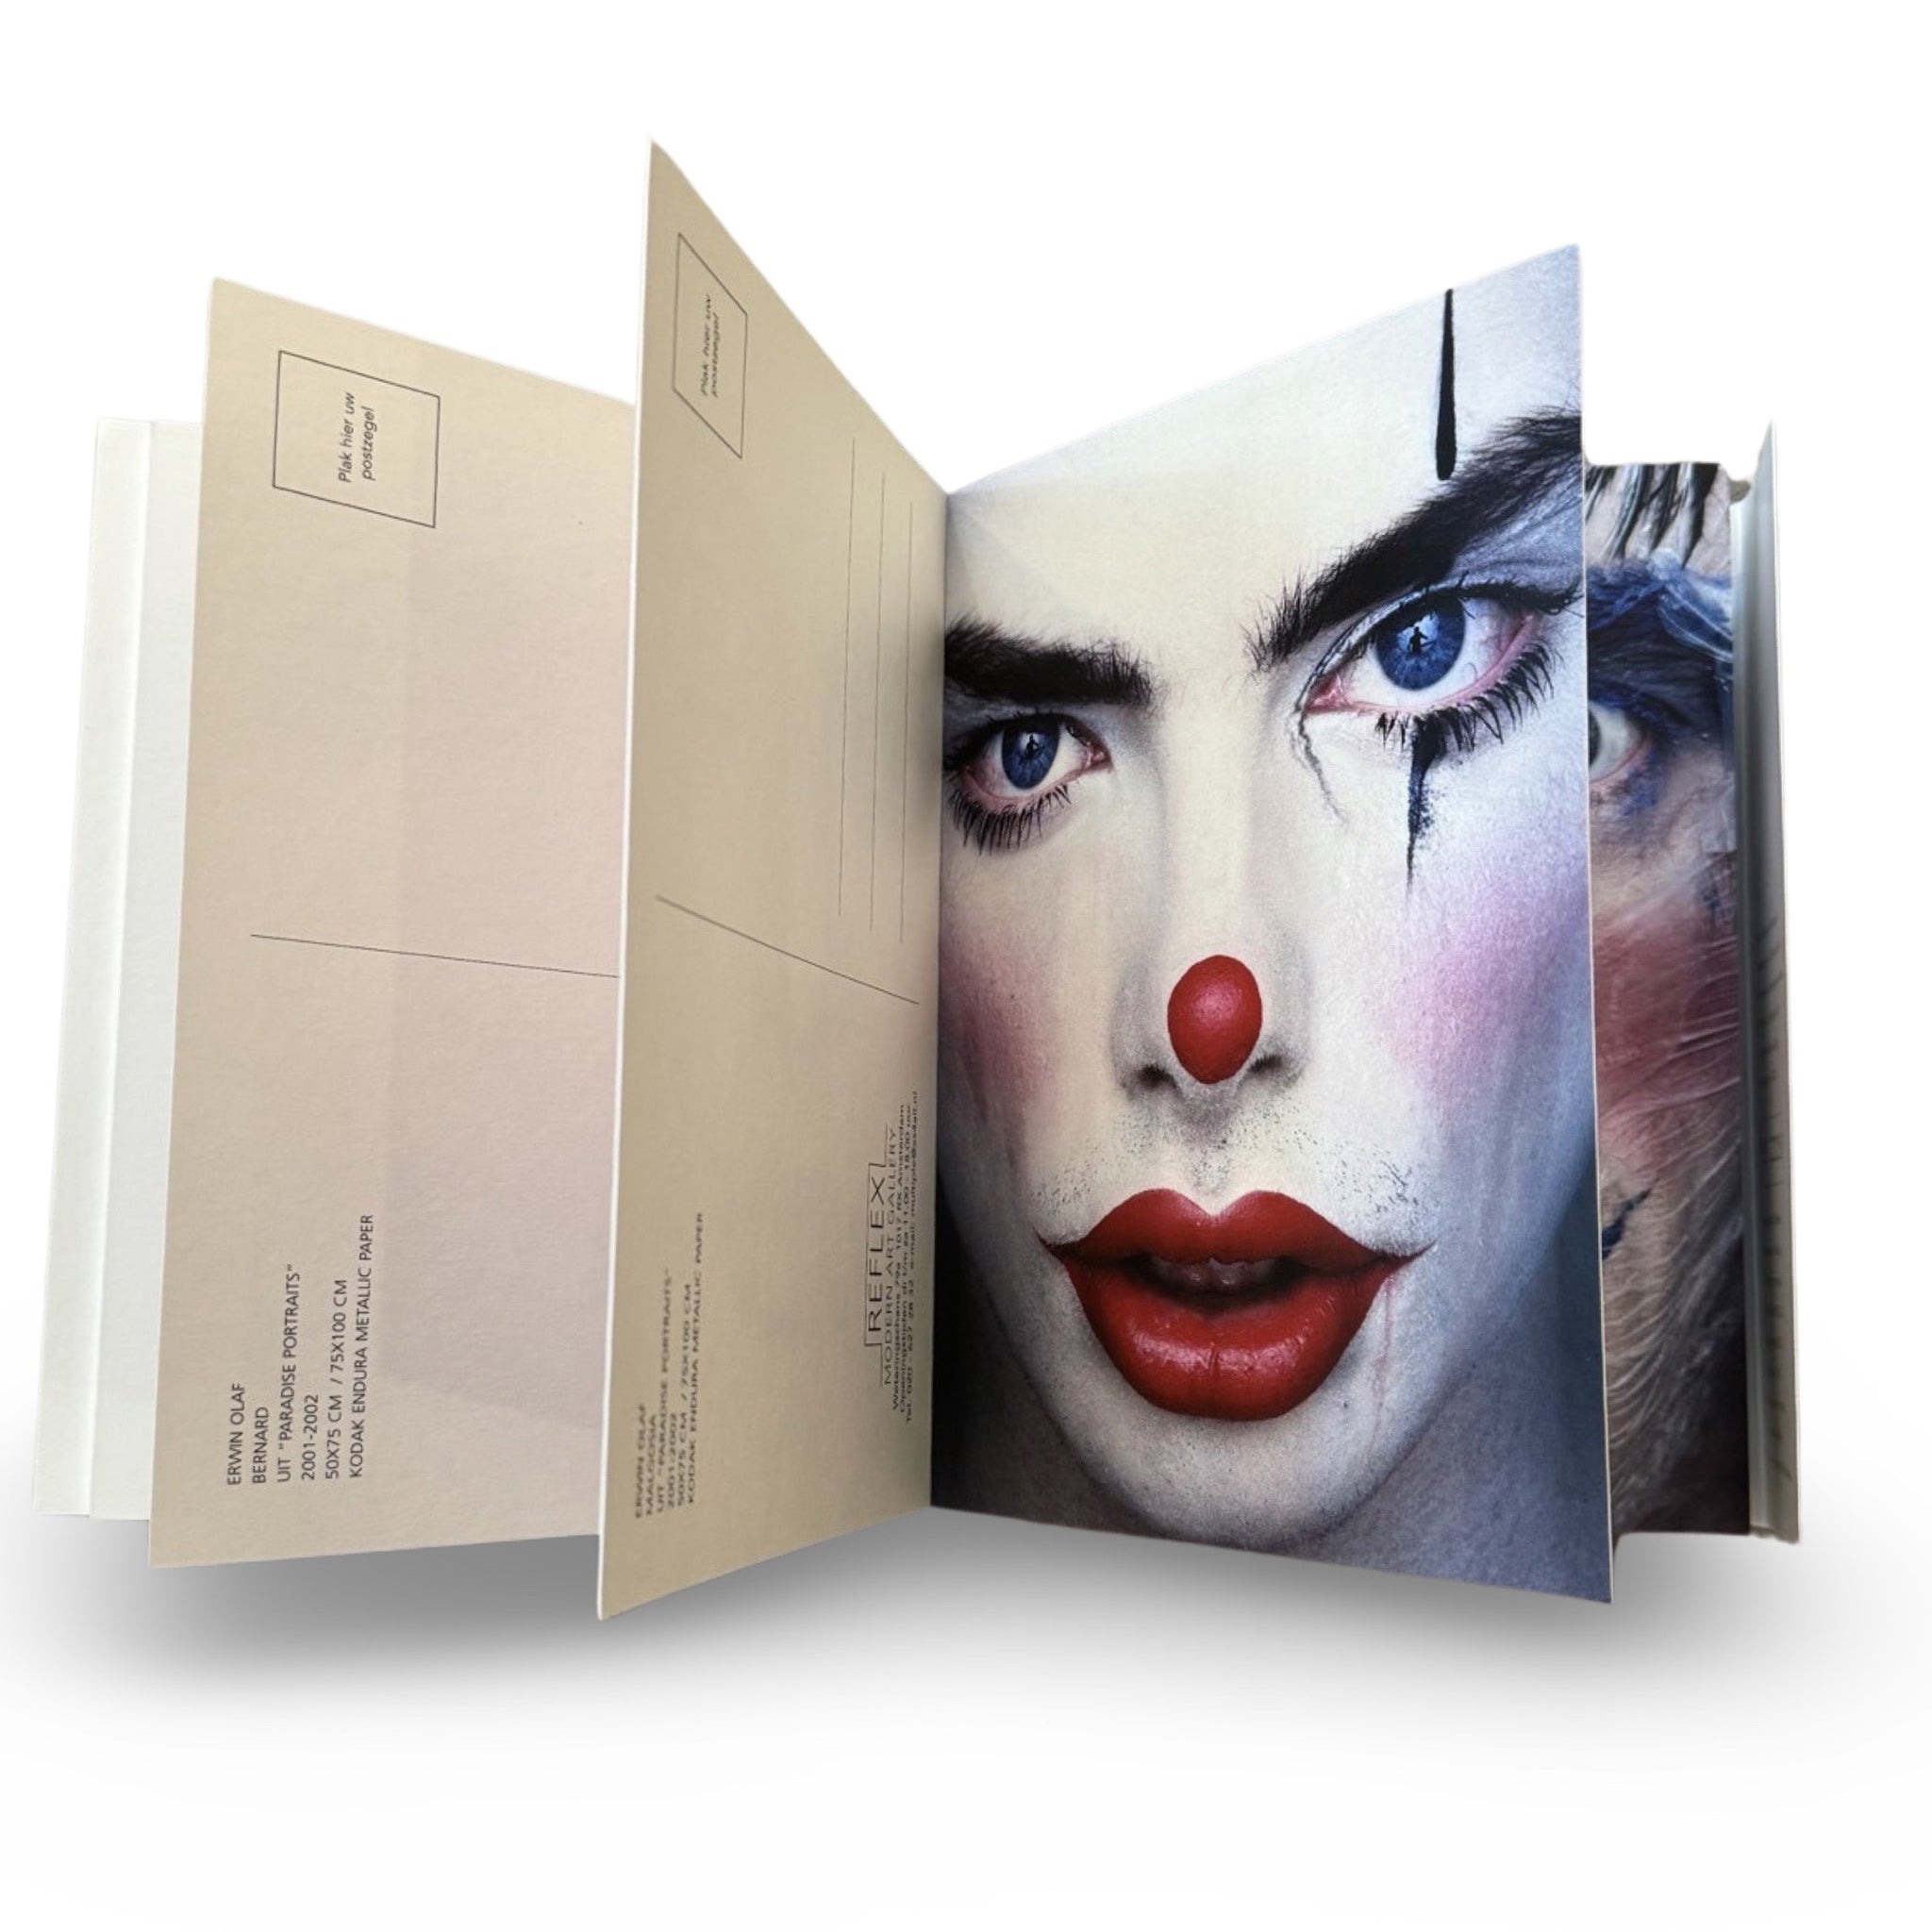 Erwin Olaf - Paradise Portraits, Harry | complimentary Paradise Portraits collectors book included